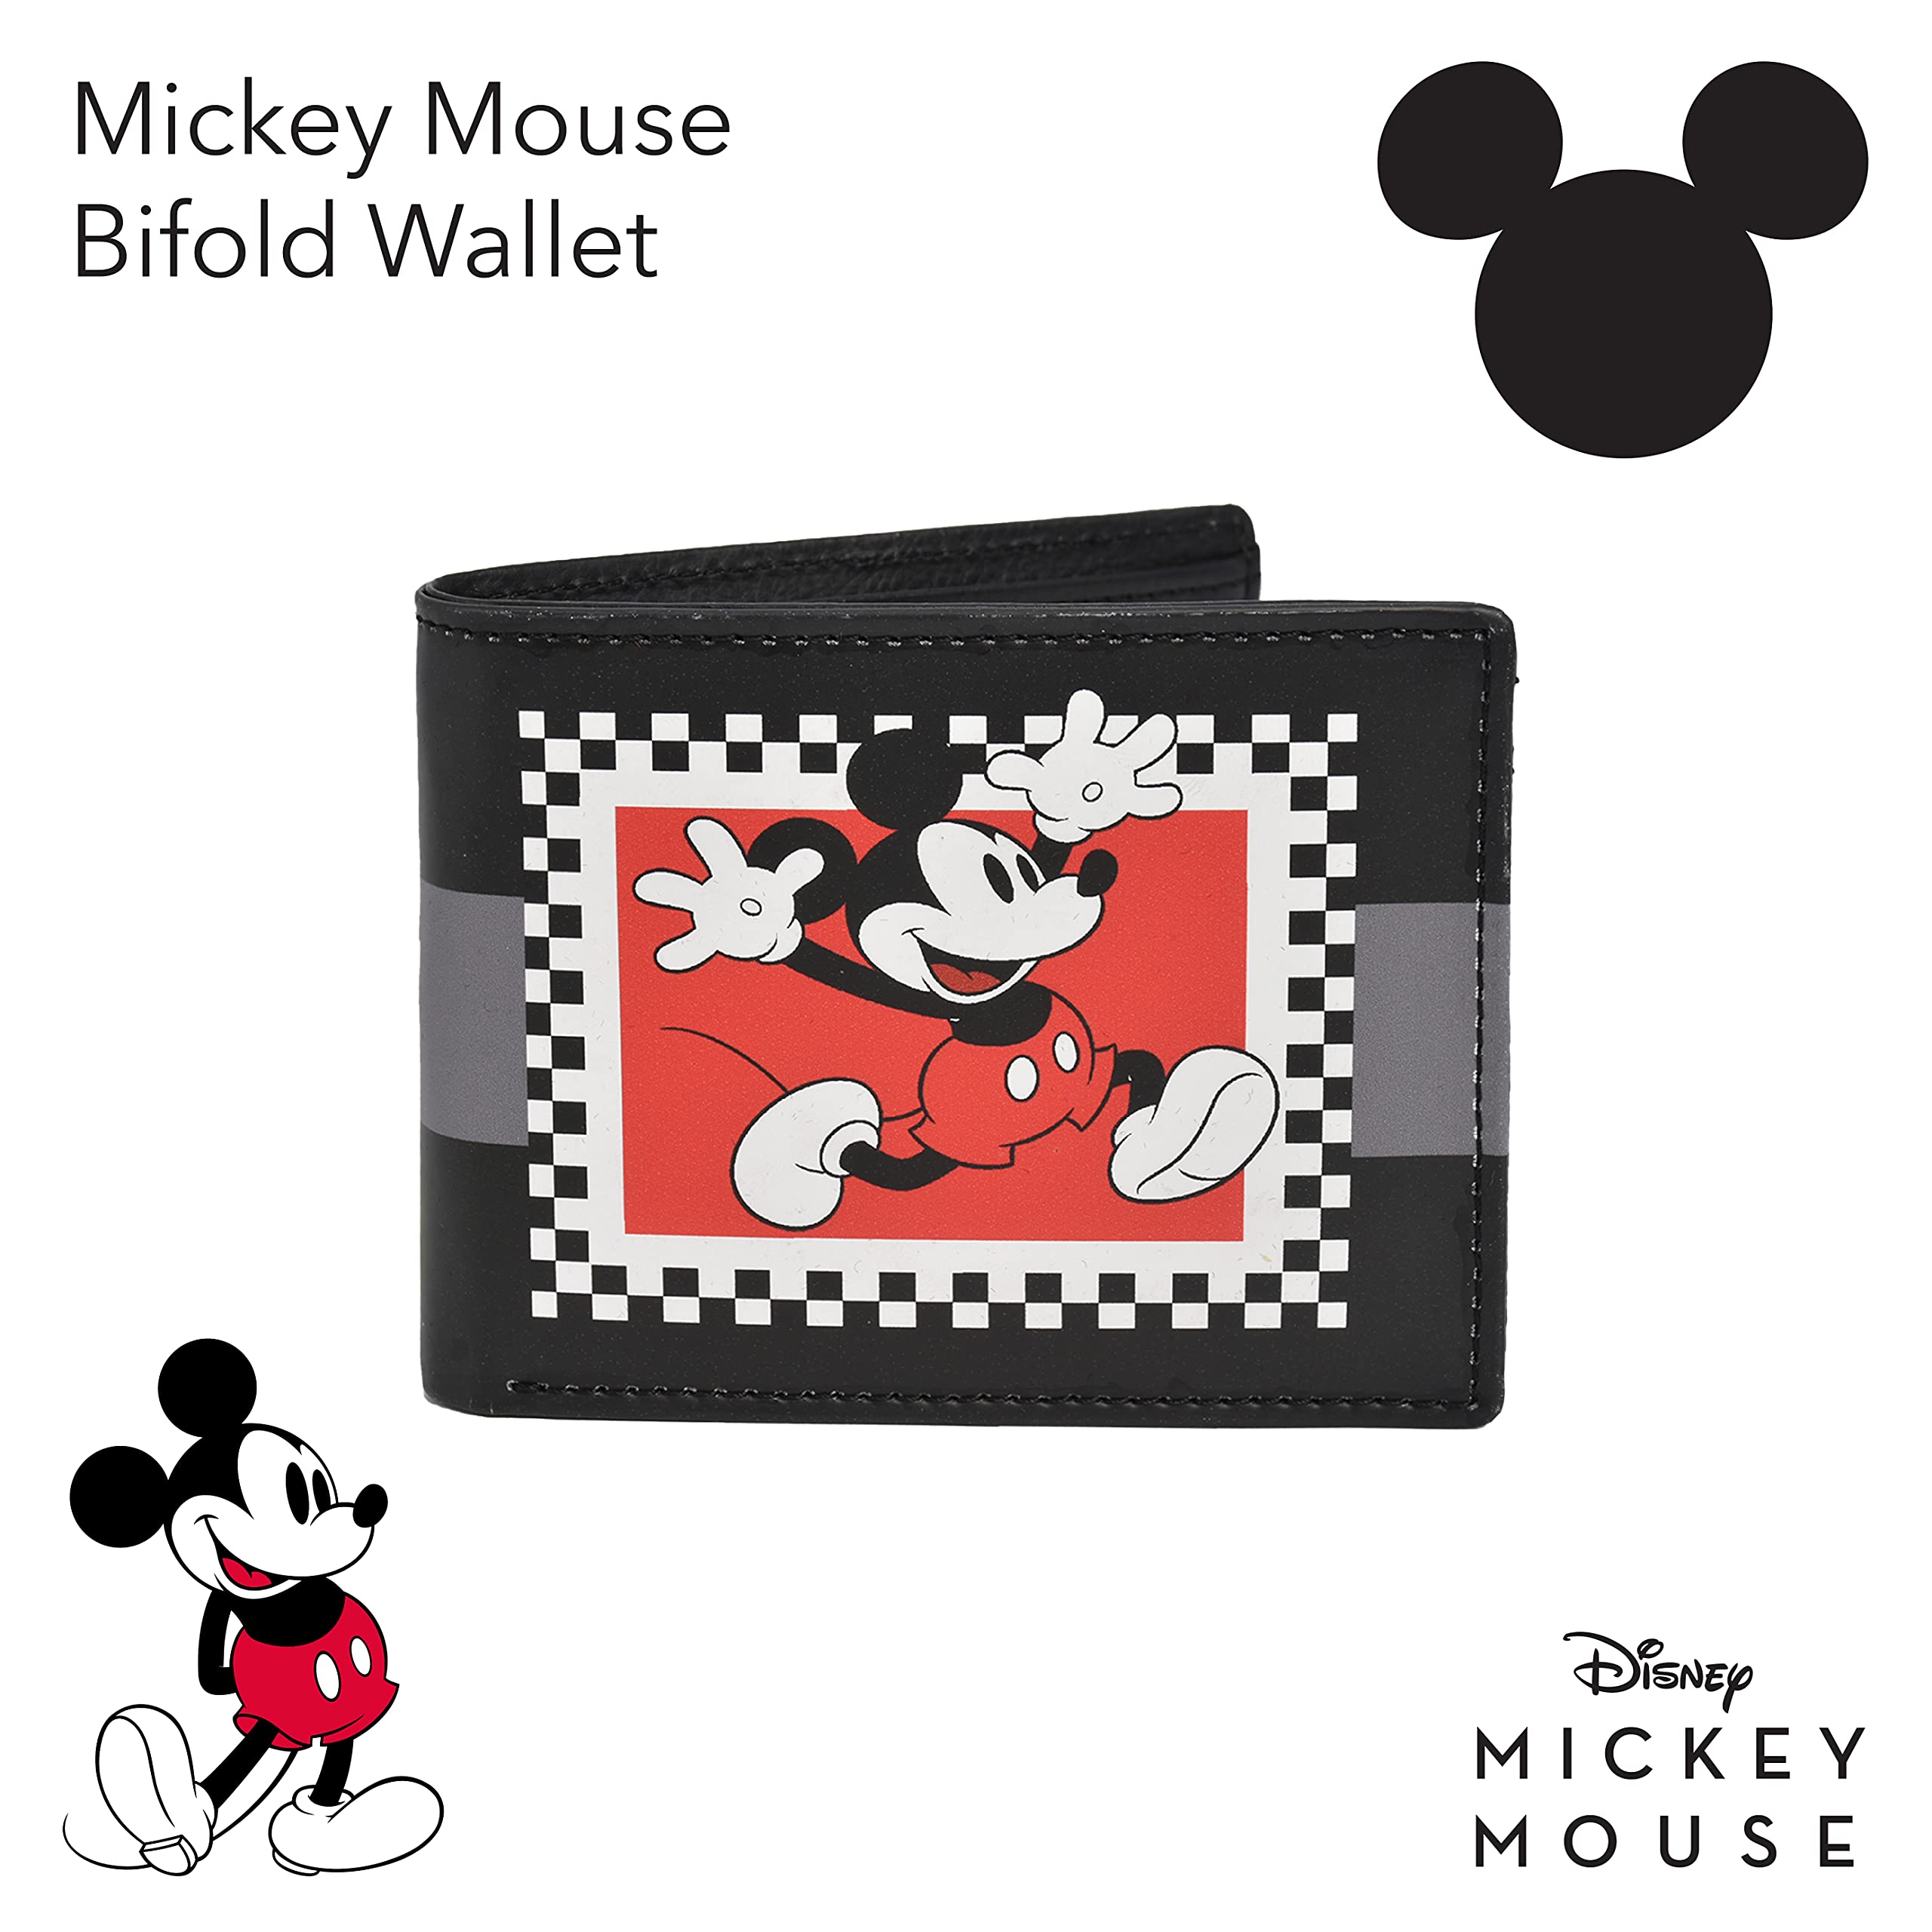 Disney's Mickey Mouse Vintage Bifold Wallet in a Decorative Tin Case, Multi